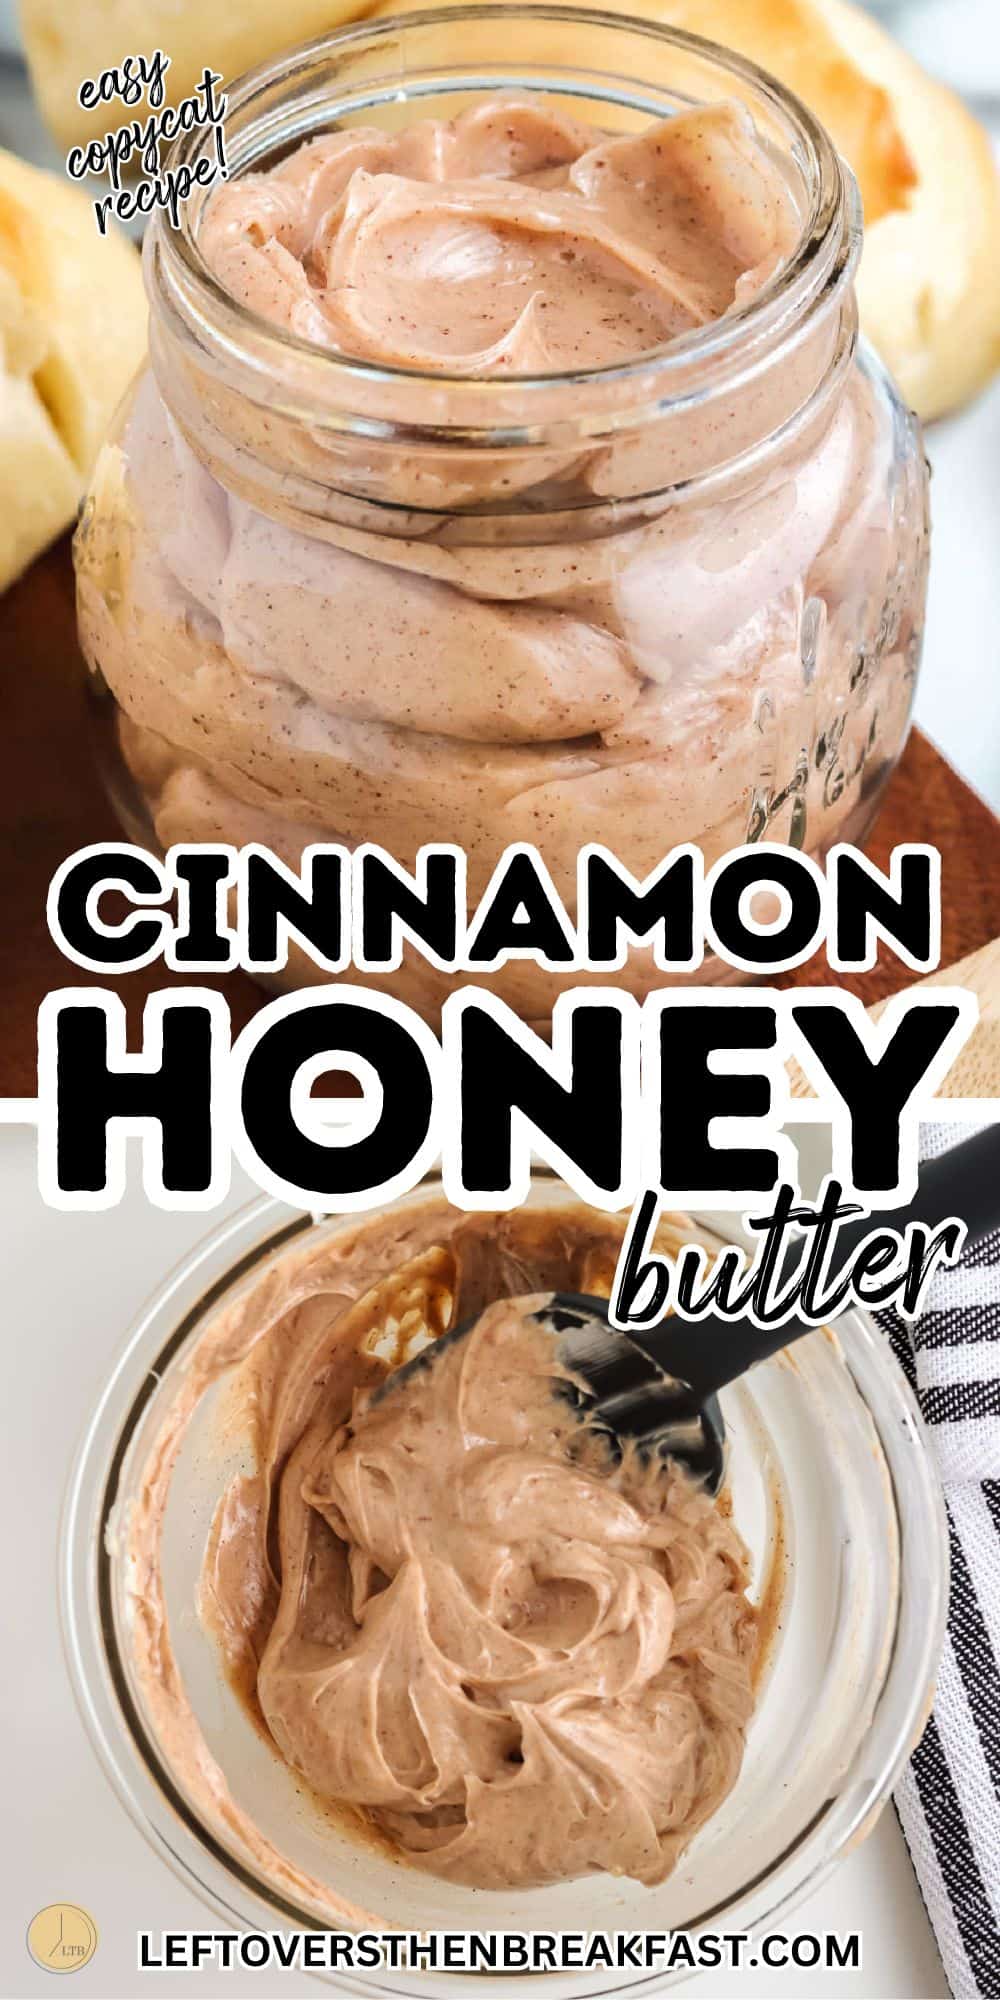 cinnamon honey butter pictures in a collage